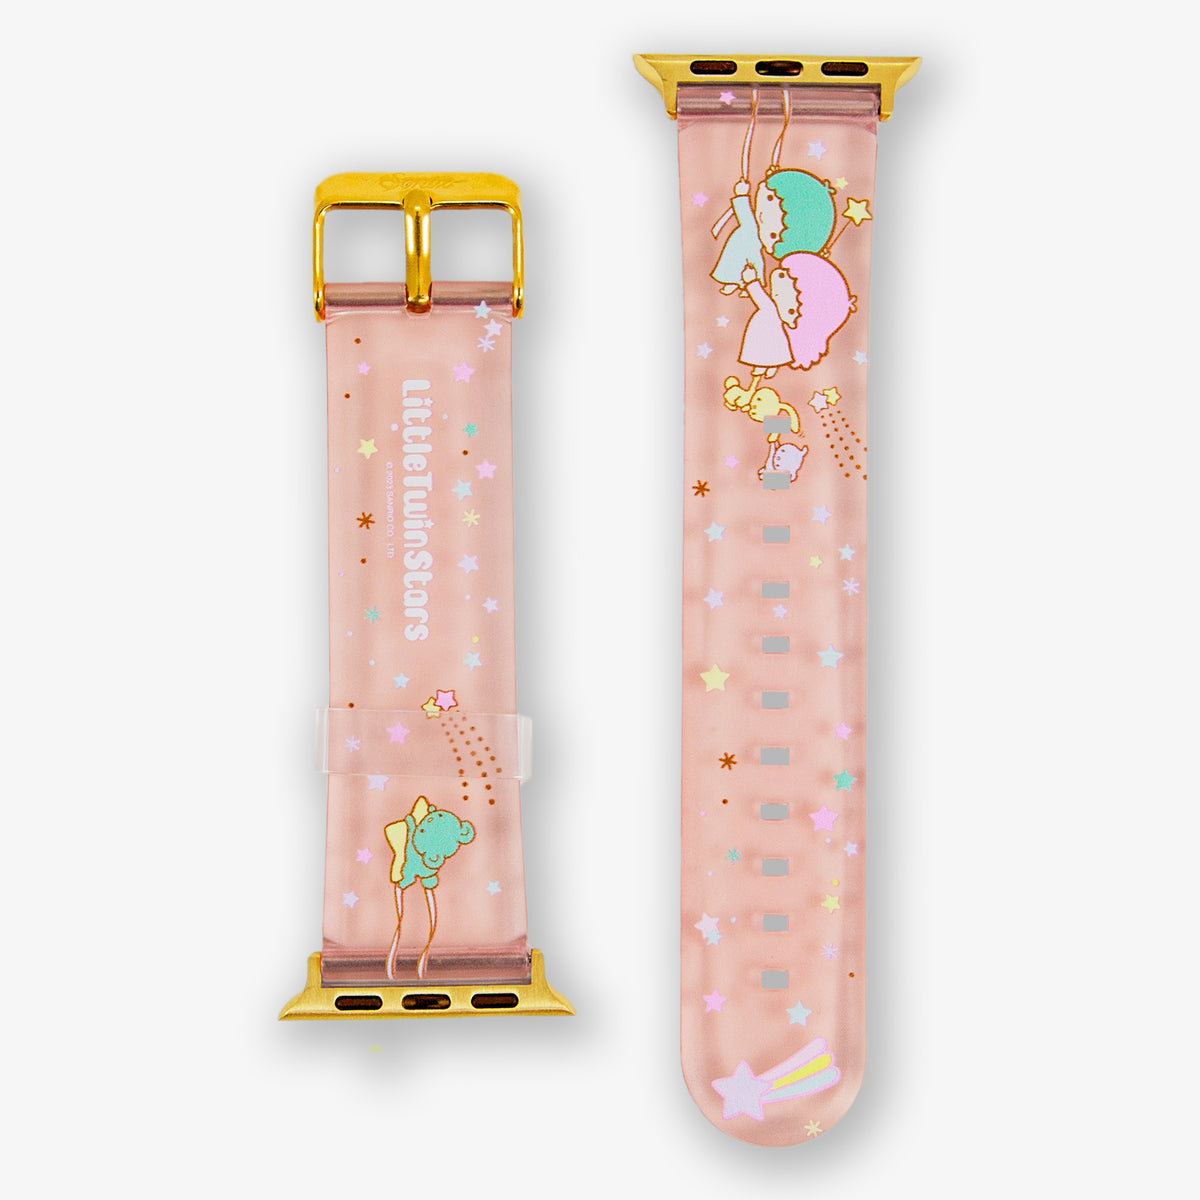 Hello Kitty Apples Jelly Apple Watch Band